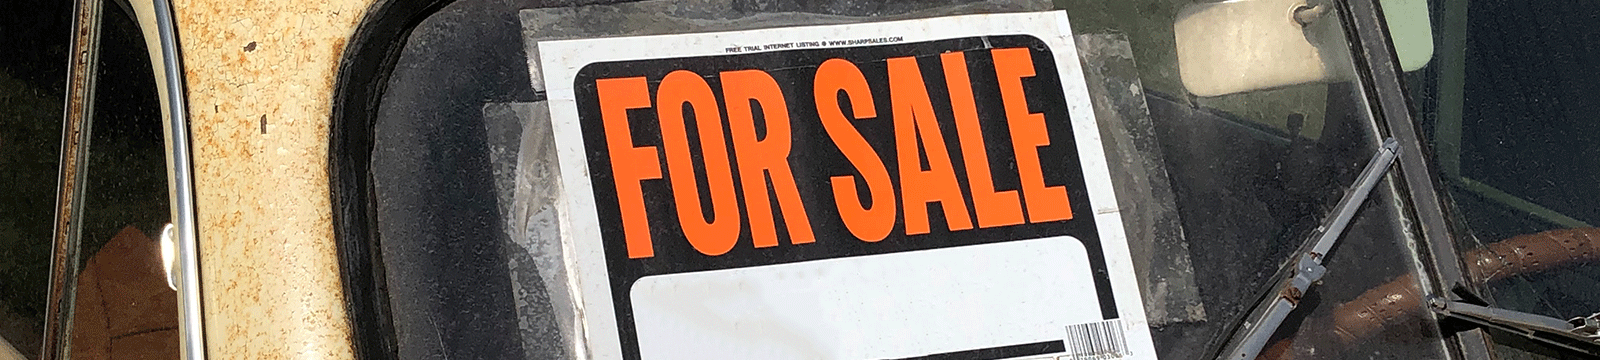 Orange and black for sale sign on a car windshield.